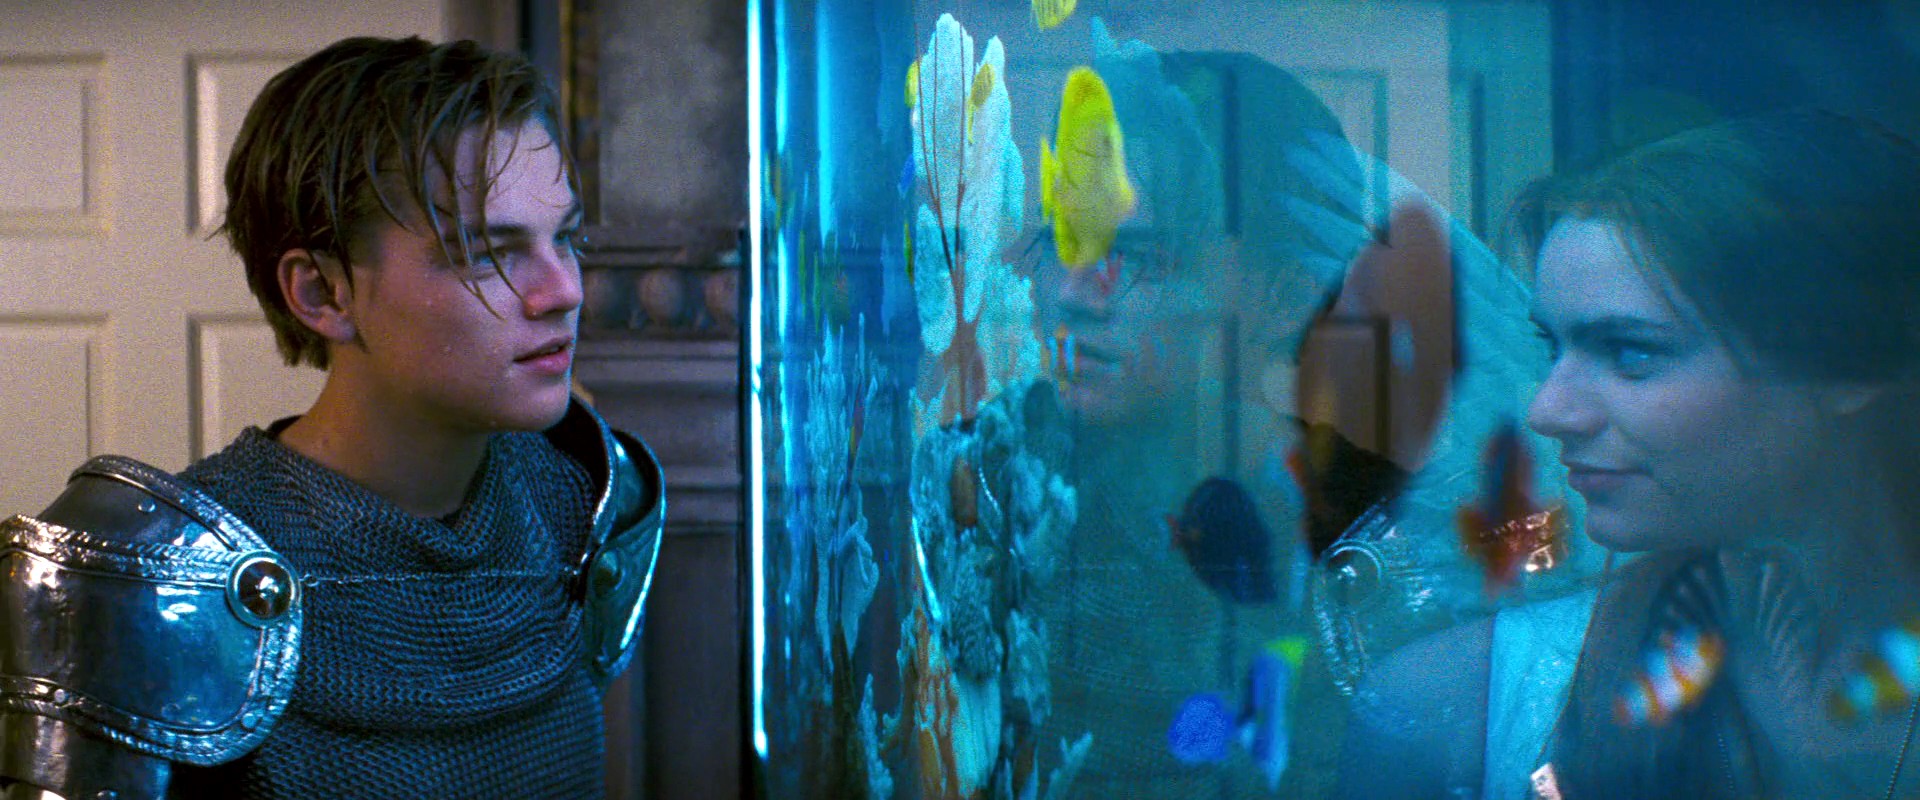 Romeo, in a costume of knight in shining knight armor, and Juliet, dressed as an angel with white wings, meet each other for the first time as a masked ball. They discover each other’s presence through an aquarium. Romeo stands to the left of the frame. The right of the frame is taken up entire by the fish tank, with tropical fish swimming near Juliet’s face.